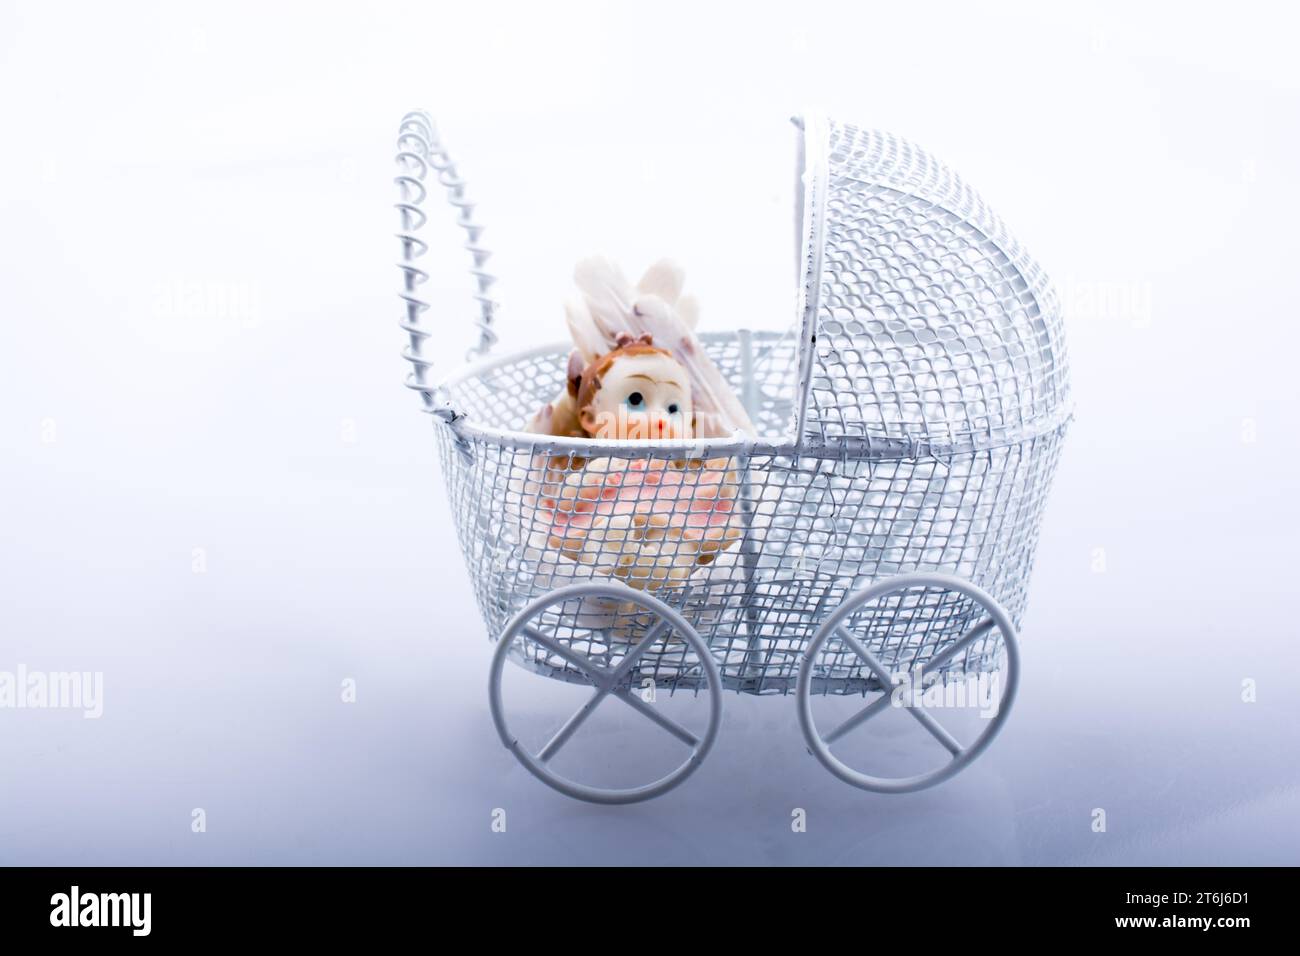 Little baby doll in baby carriage on a white background Stock Photo